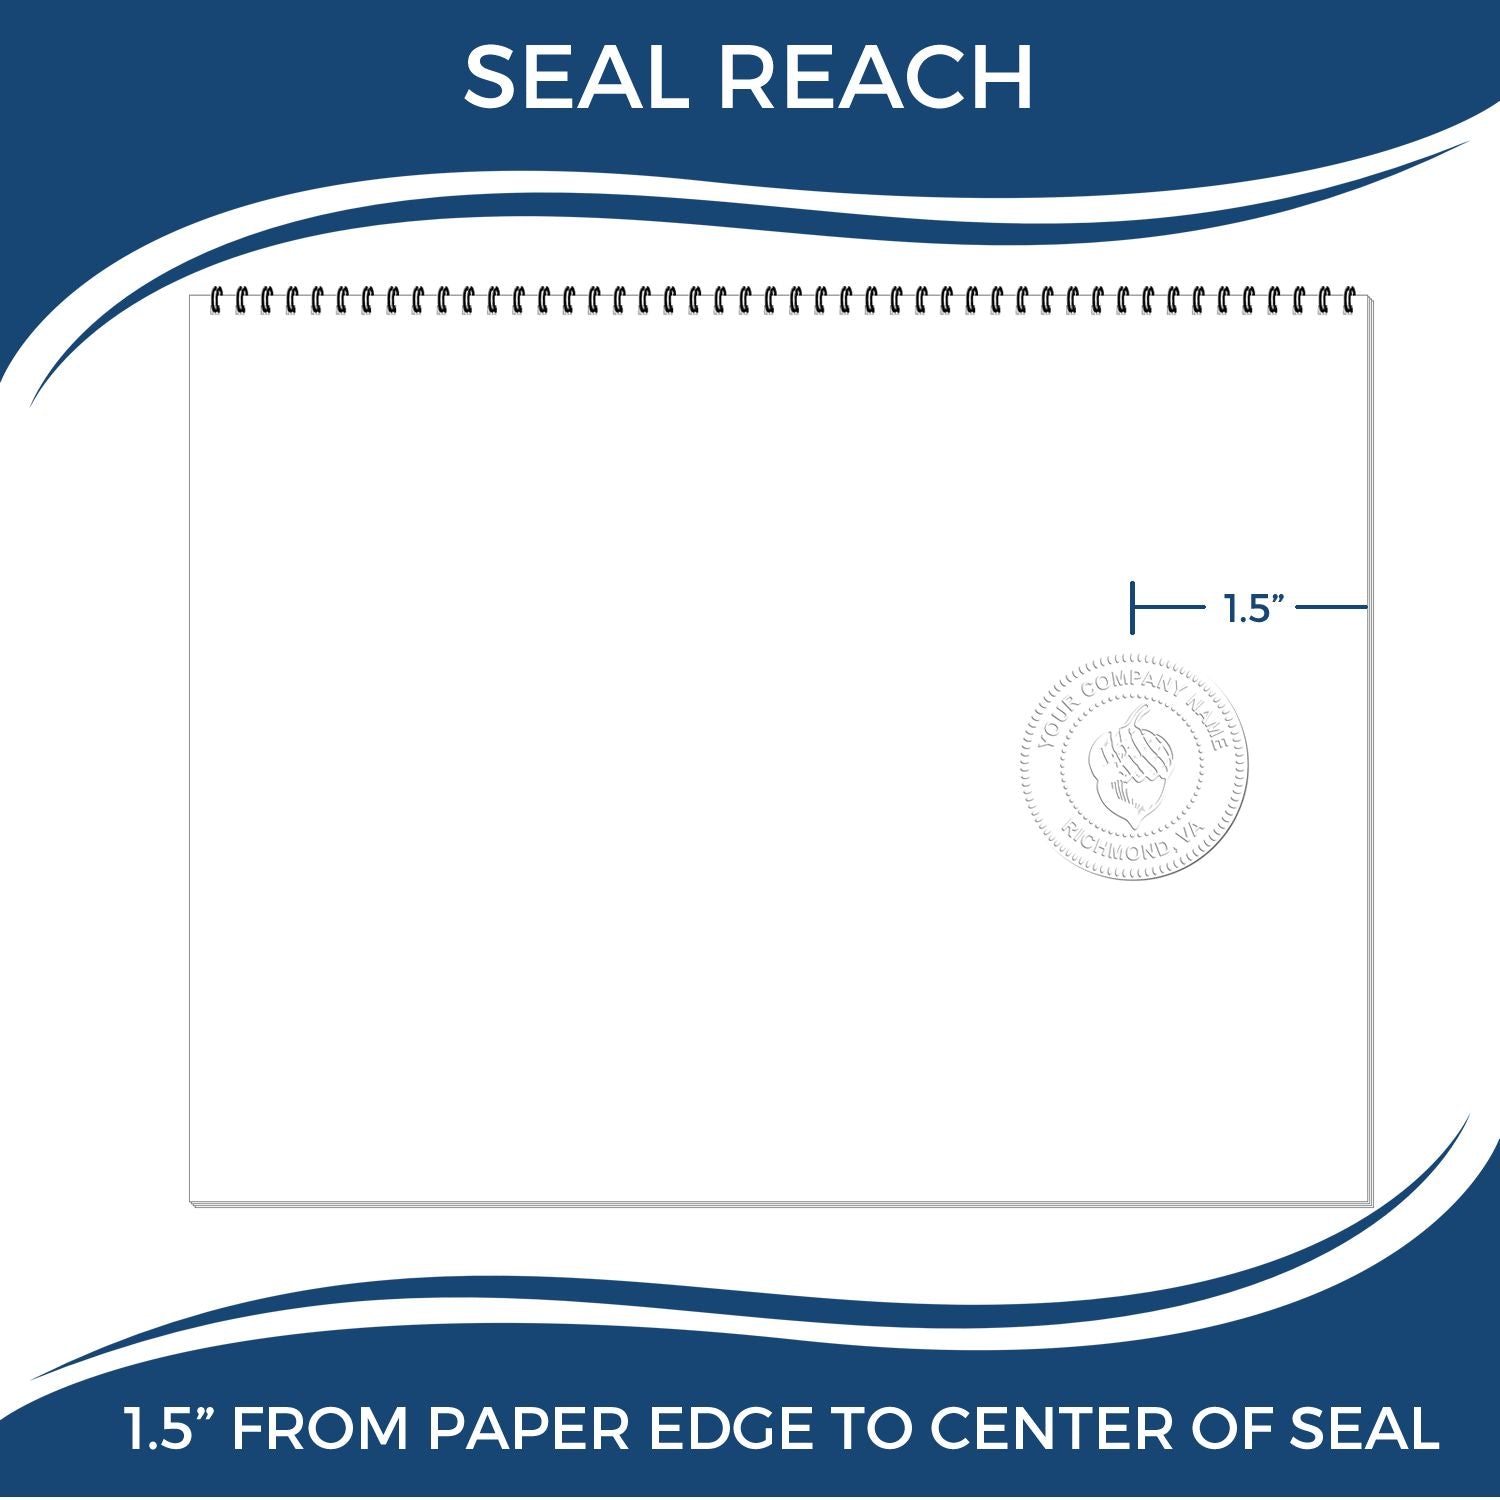 An infographic showing the seal reach which is represented by a ruler and a miniature seal image of the Tennessee Desk Landscape Architectural Seal Embosser